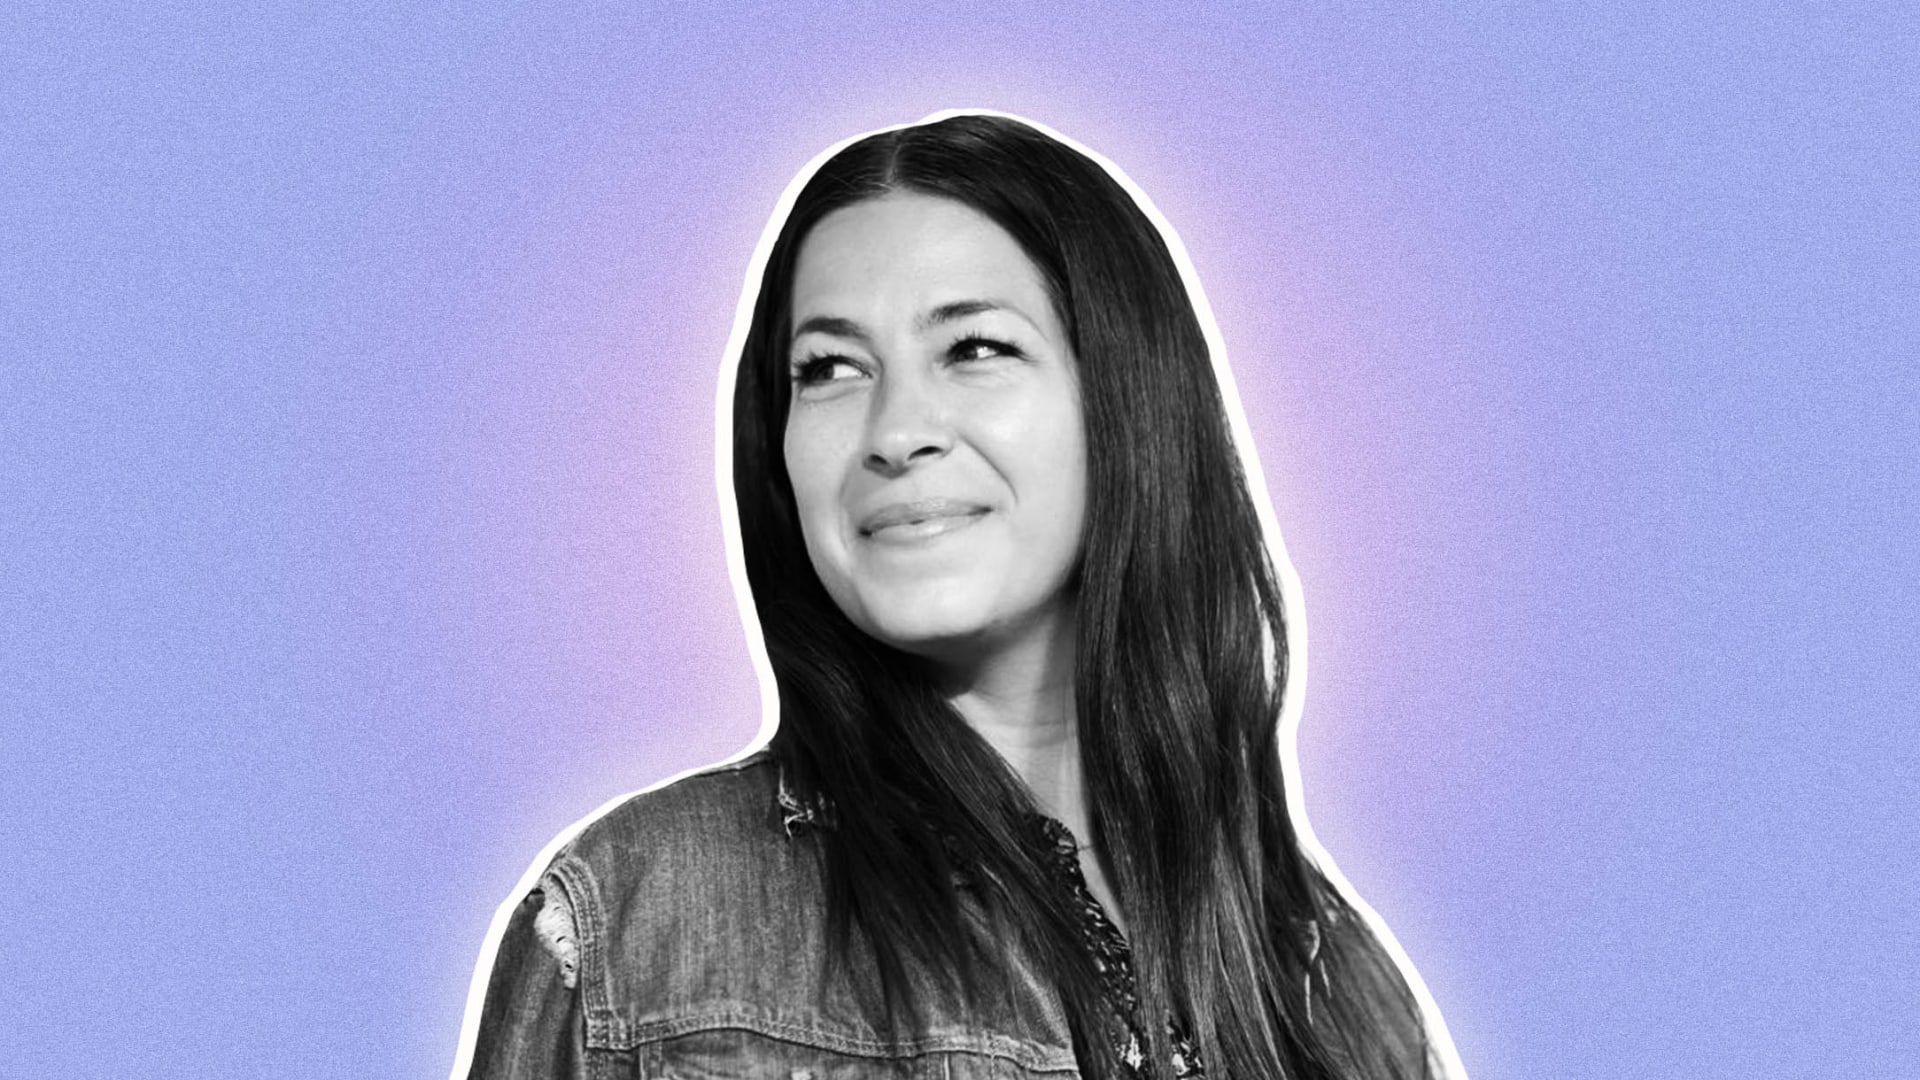 How Any Founder Can Learn to Be Fearless, According to Rebecca Minkoff